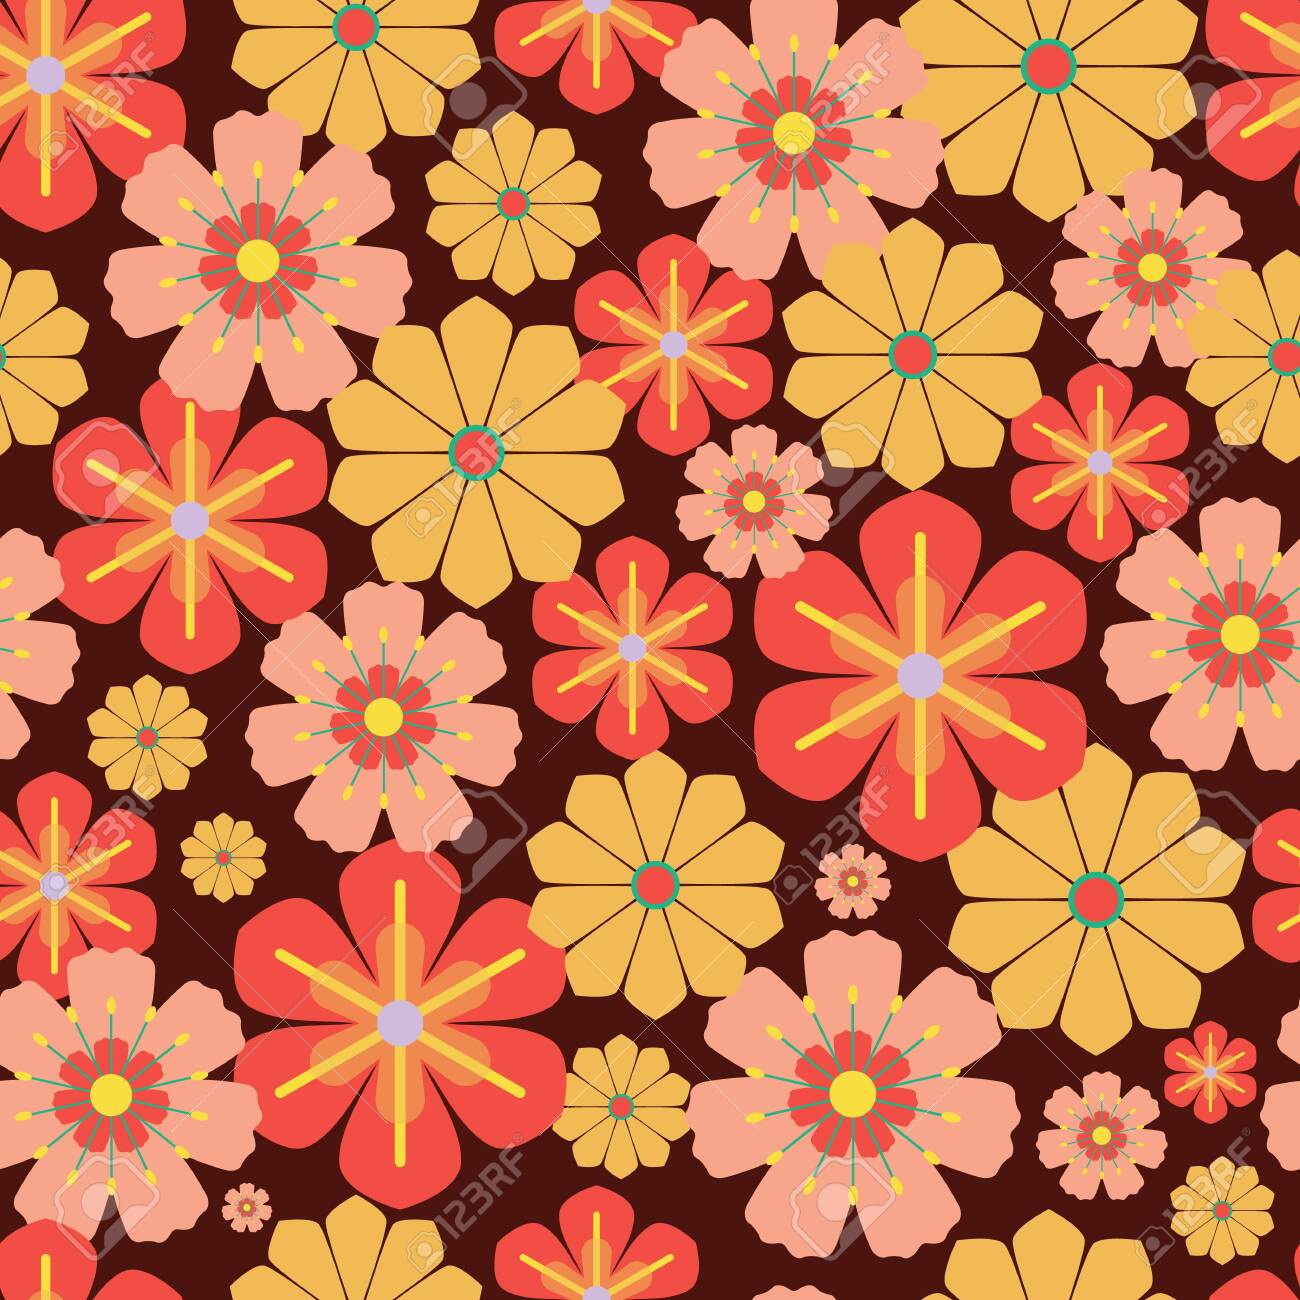 Vector 60s 70s Retro Vintage Flowers Seamless Pattern Background